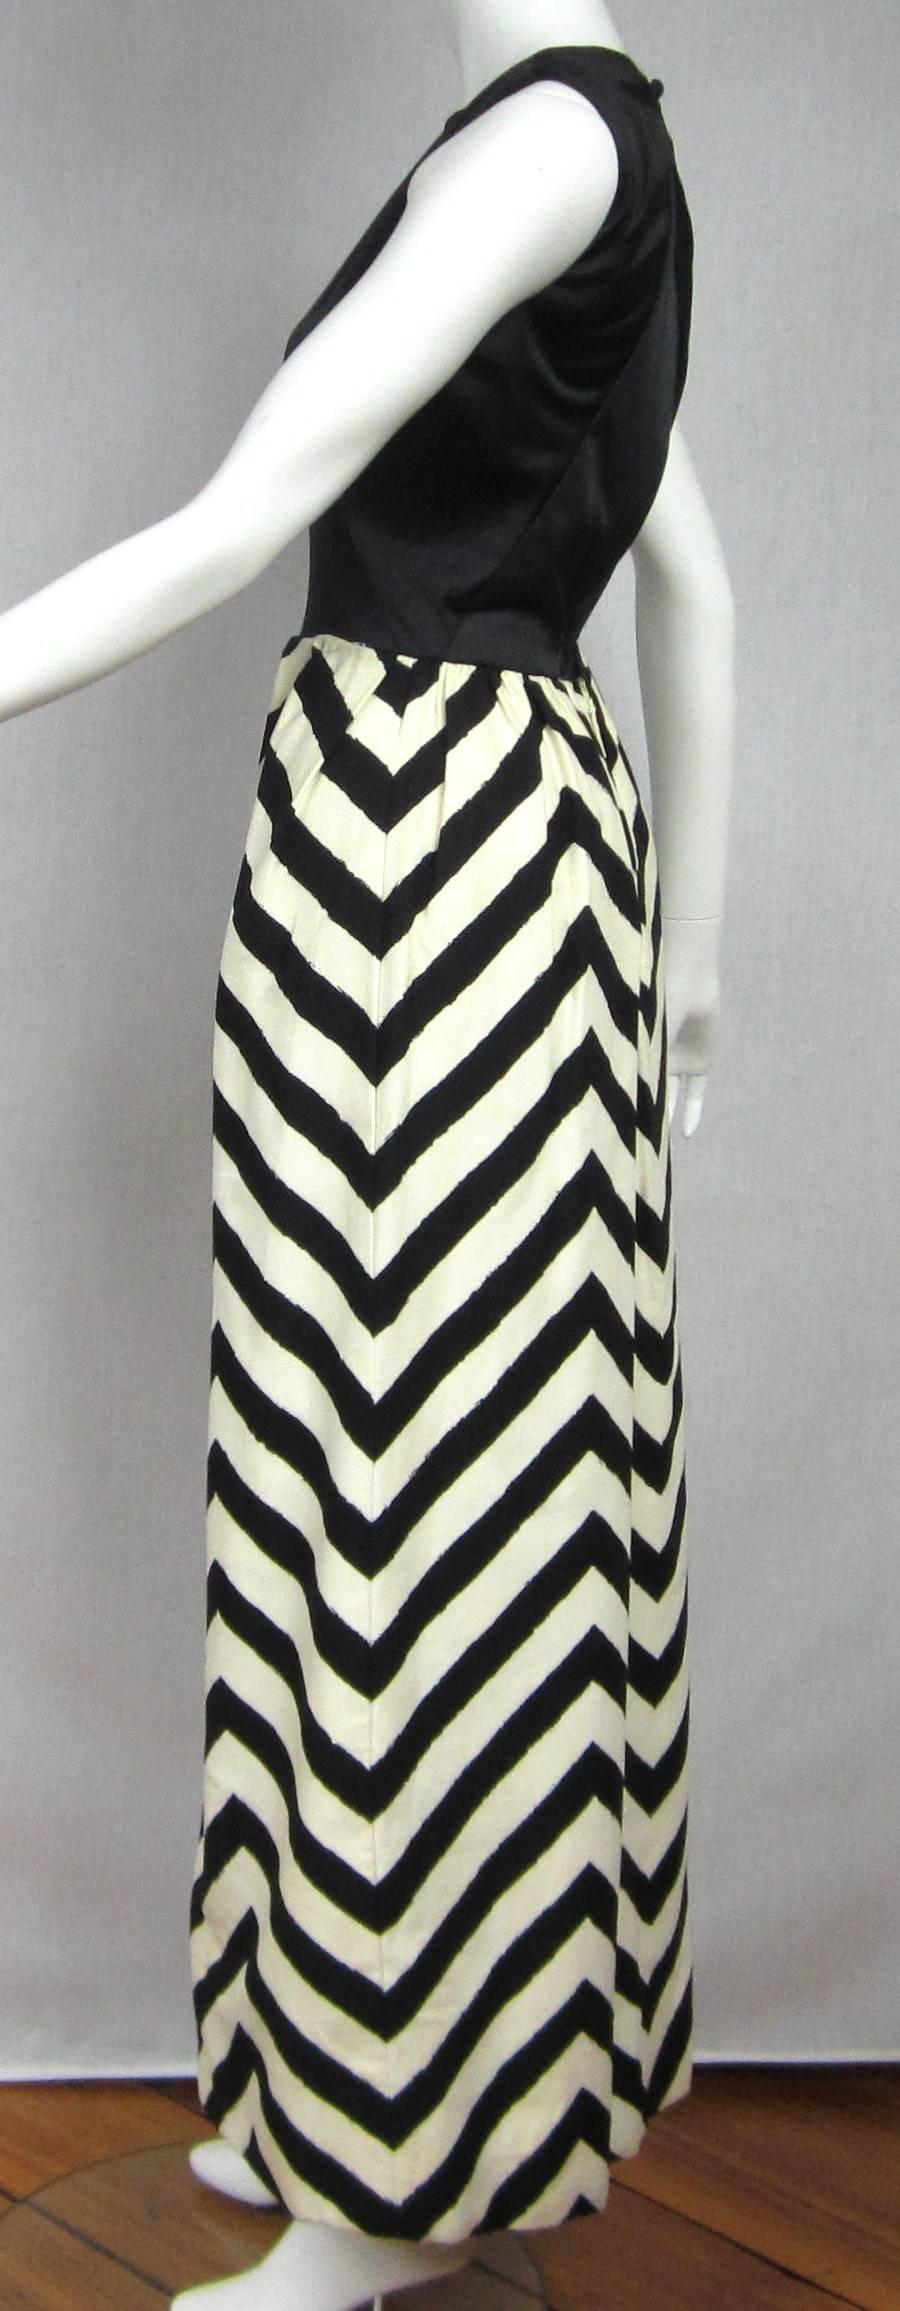 Maxi Dress by Oleg Cassini. Great Black and White Chevron Motif. Black Top, with sexy open back. Zippers up the skirt, clip shut at the waist and collar. The dress has Pockets. The Skirt is lined. Measurements are as follows, Bust 36 ** Waist 25 **